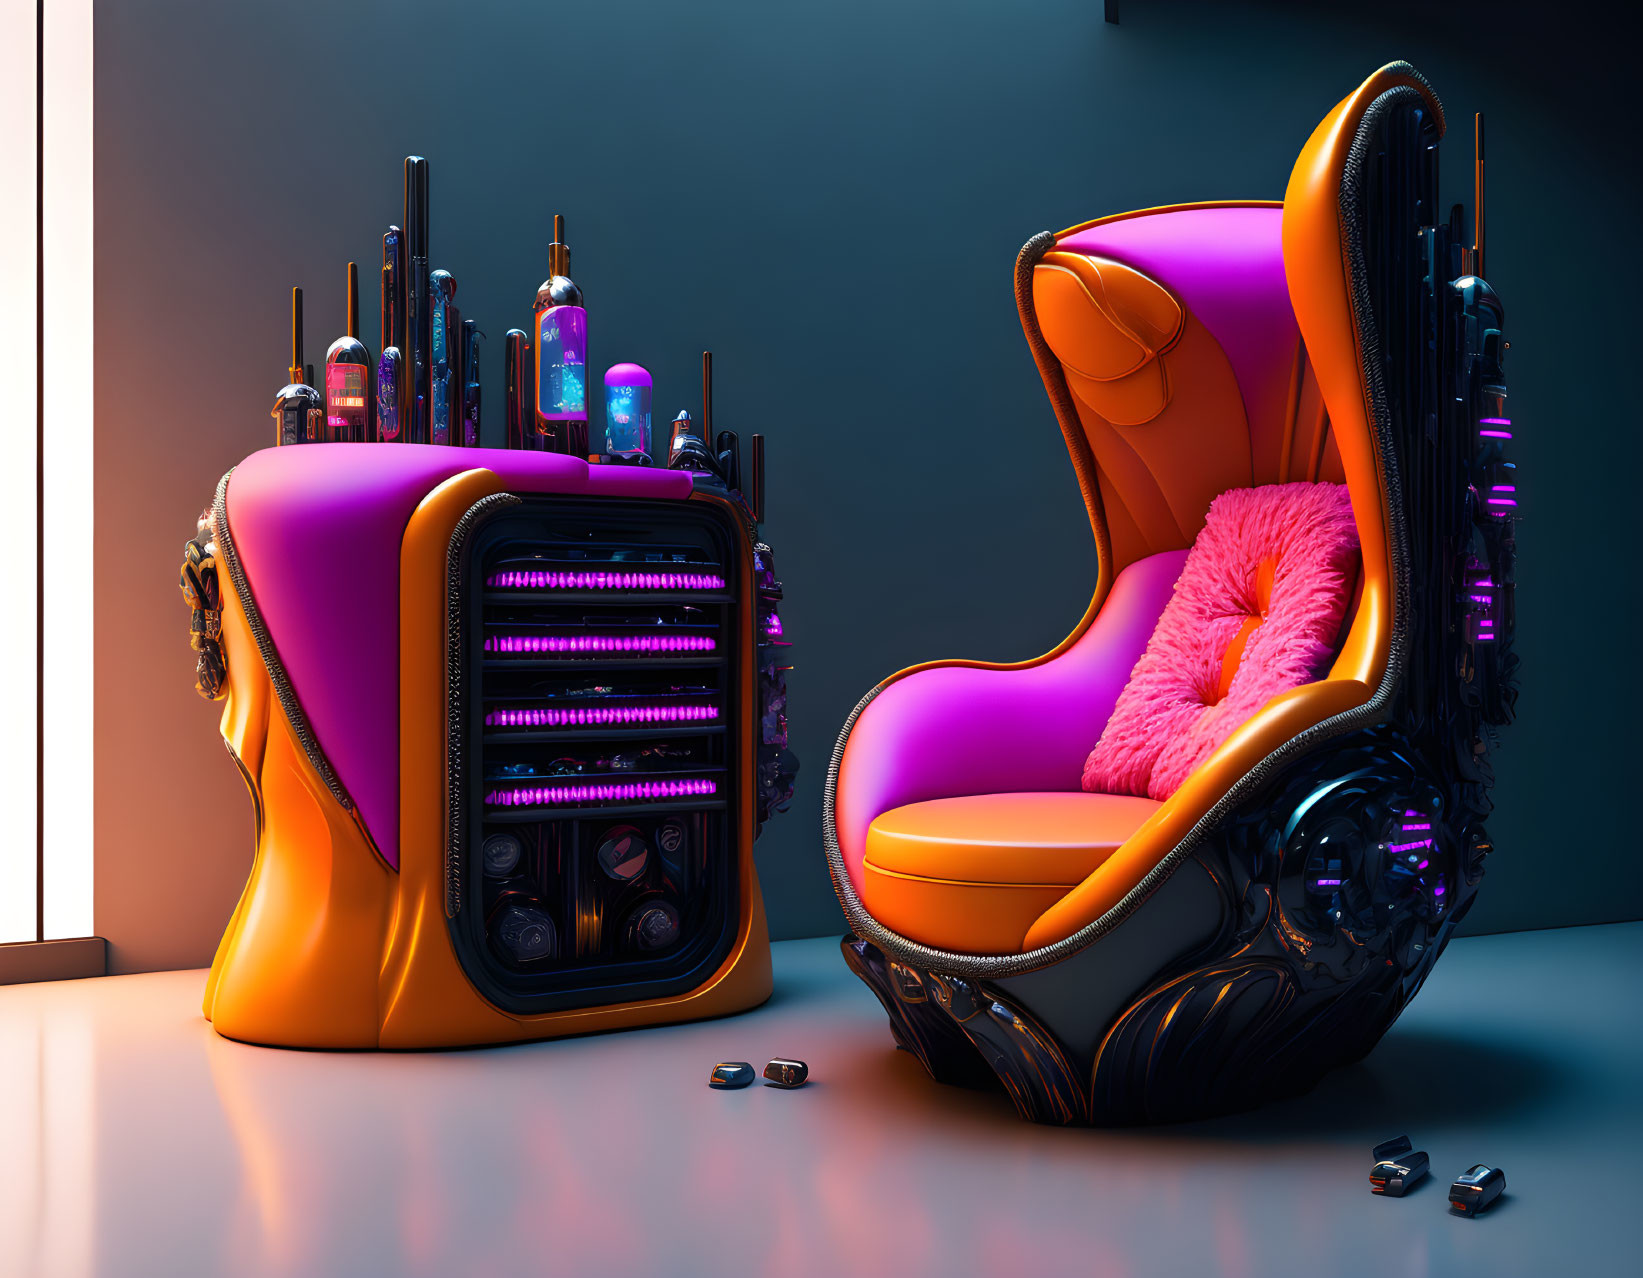 Modern orange and black armchair with neon-lit side table on teal background